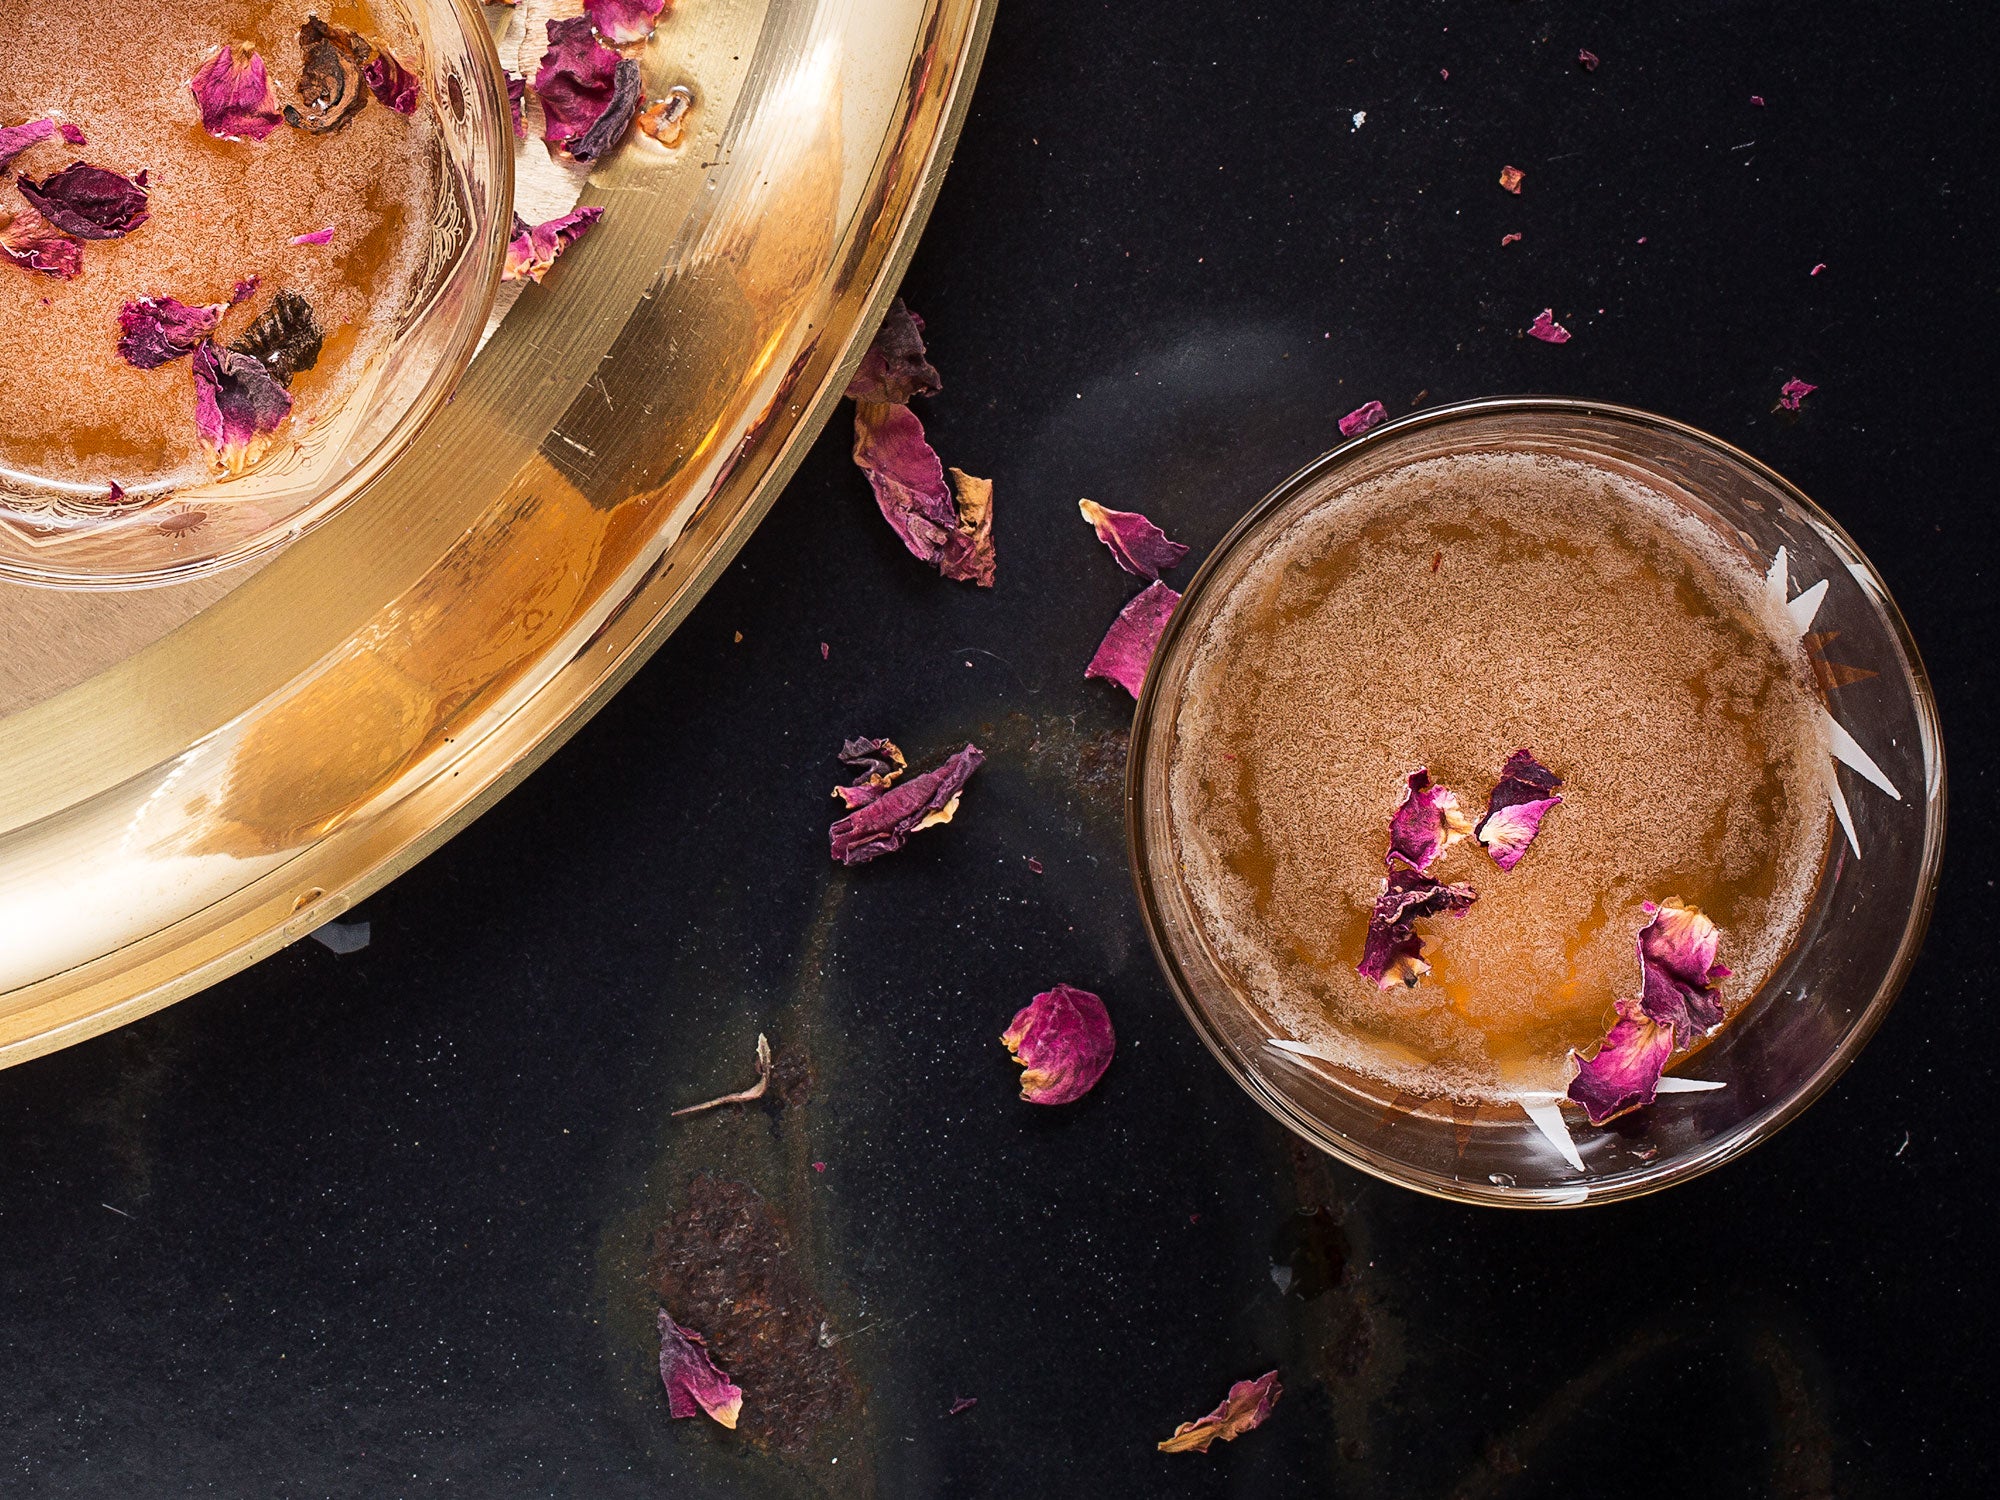 5 Ingenious Ways To Cook and Decorate with Edible Rose Petals